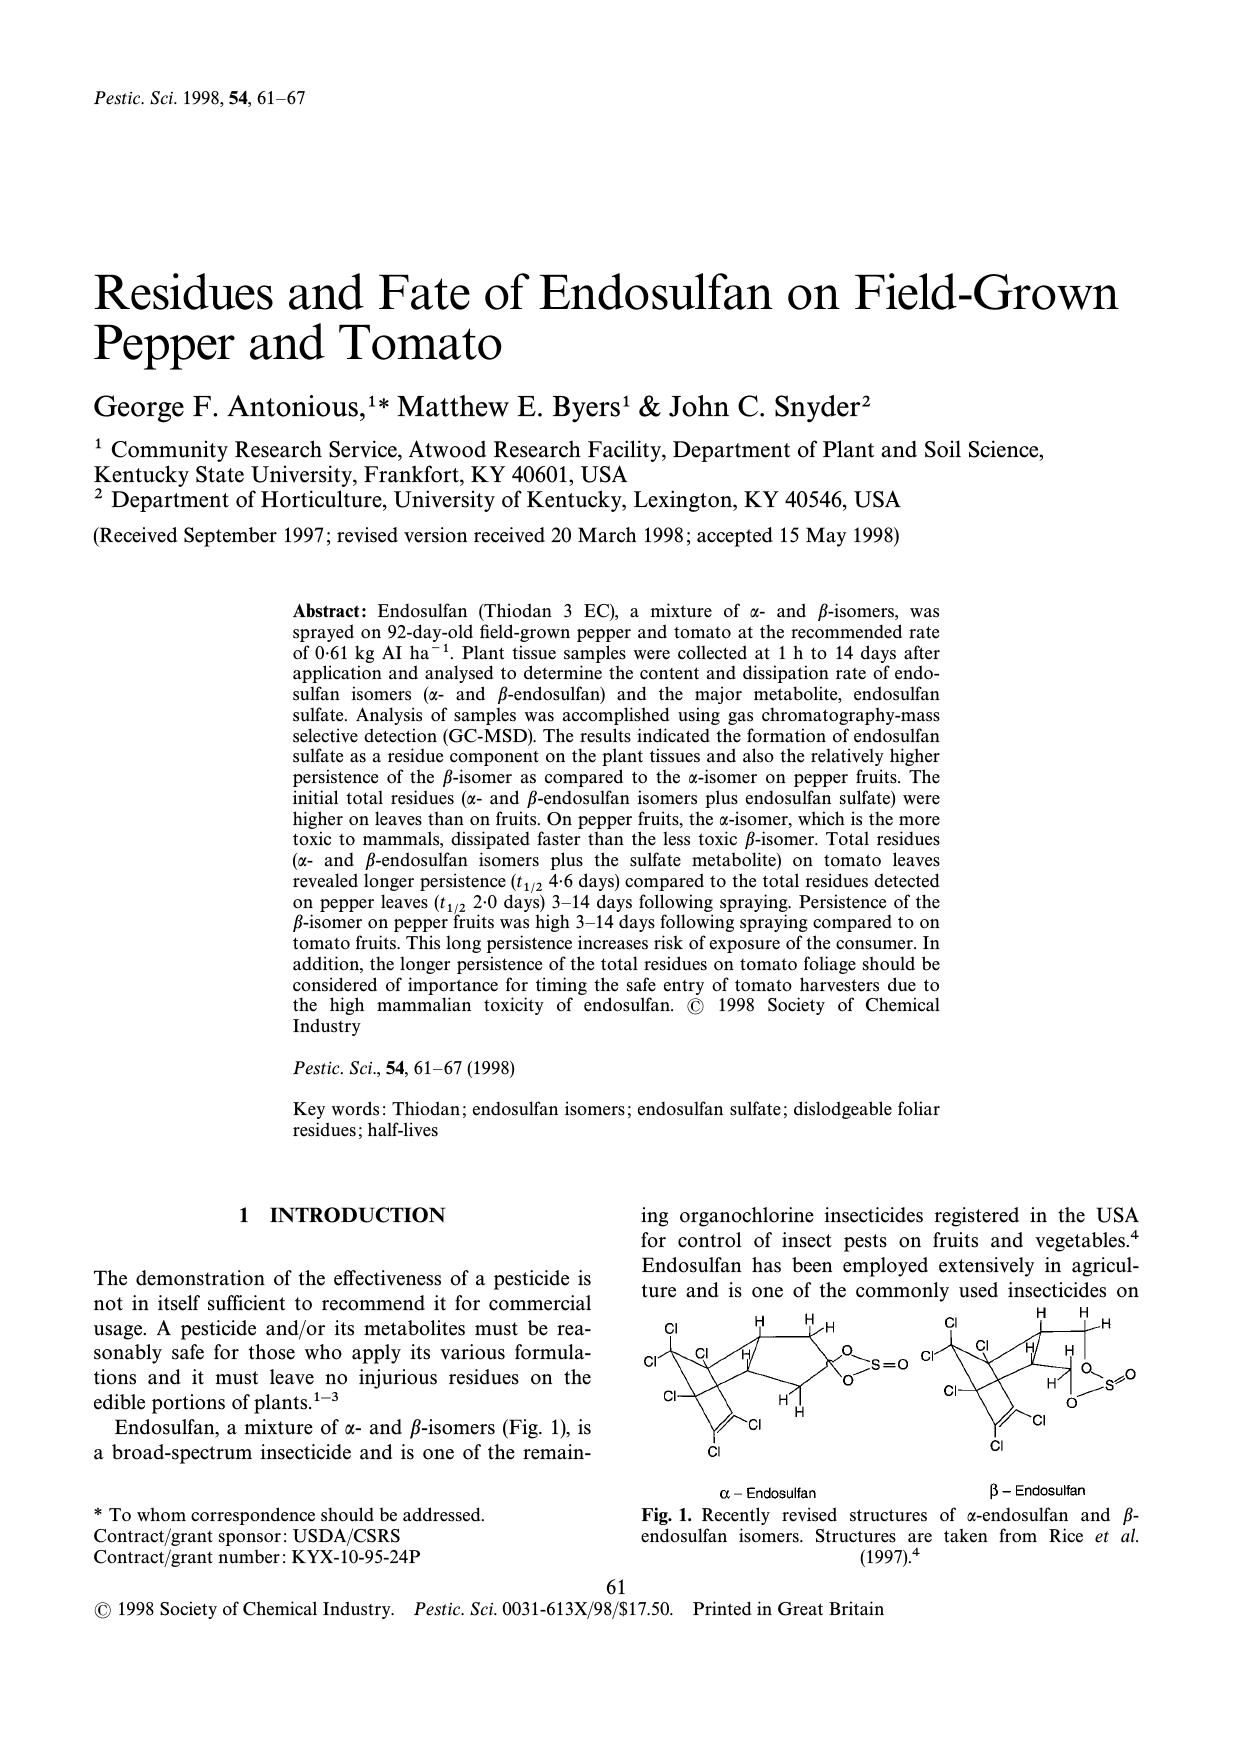 Residues and fate of endosulfan on fieldgrown pepper and tomato by Antonious Byers Snyder